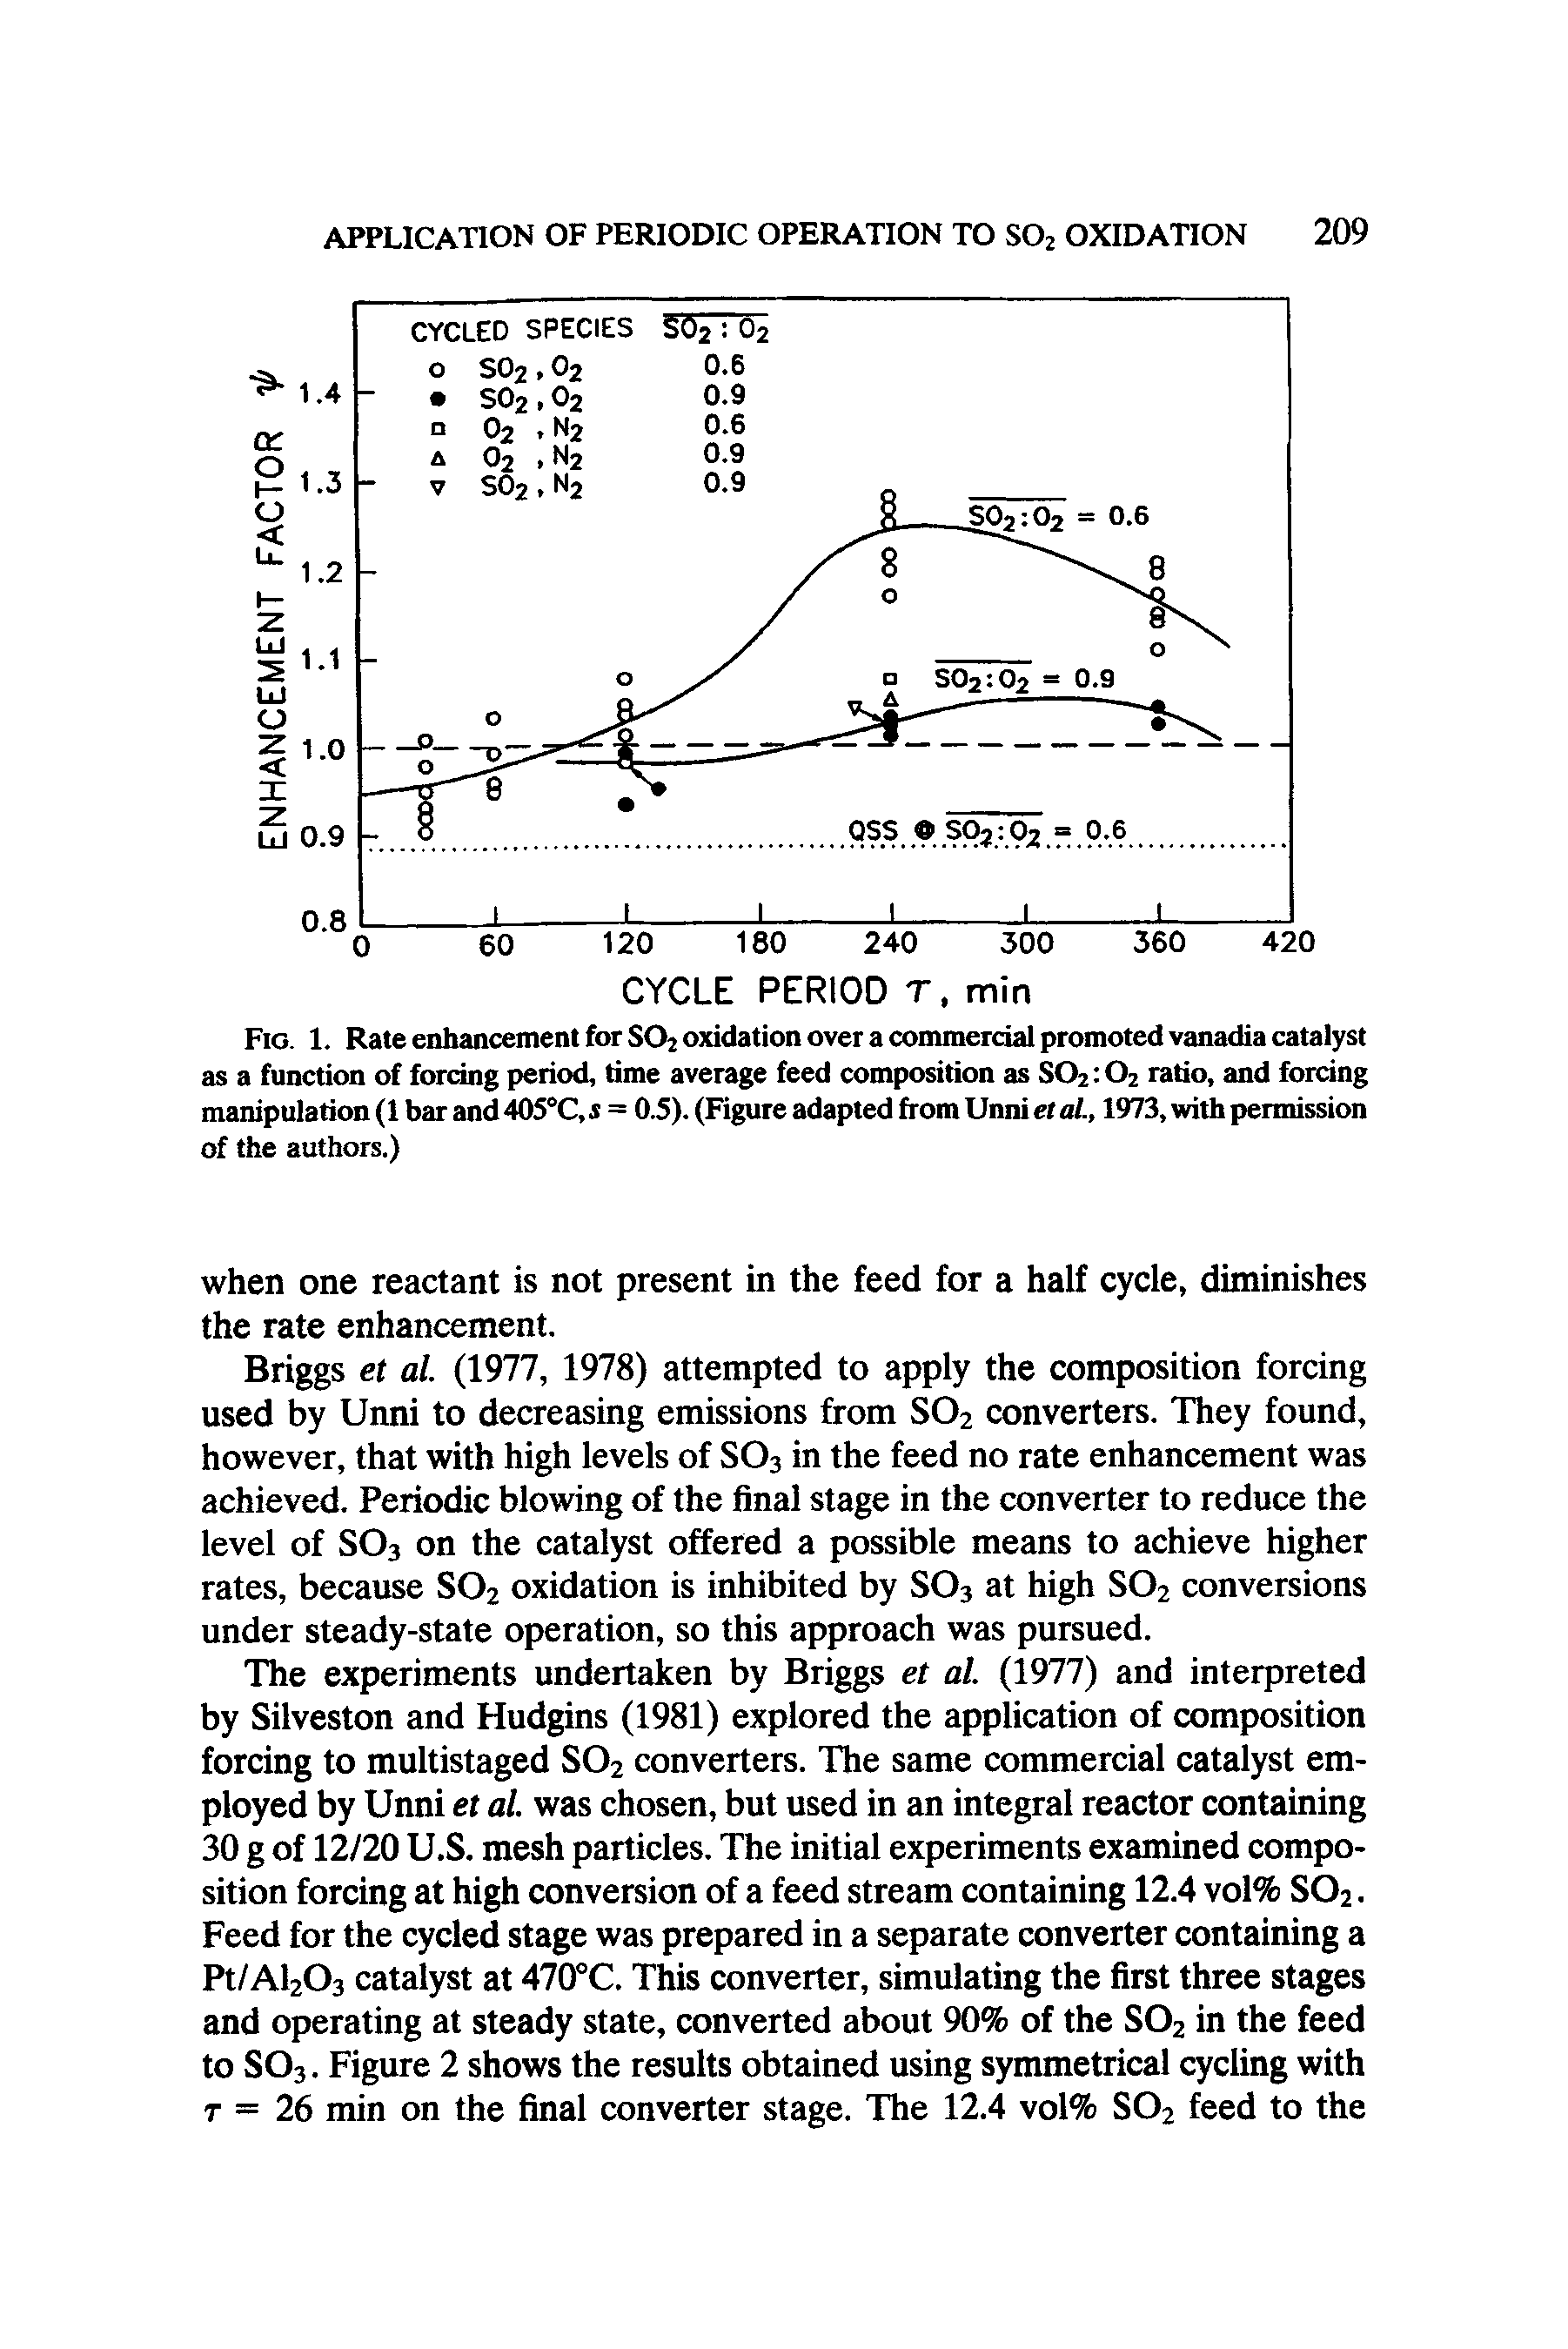 Fig. 1. Rate enhancement for S02 oxidation over a commercial promoted vanadia catalyst as a function of forcing period, time average feed composition as S02 02 ratio, and forcing manipulation (1 bar and 405°C, s = 0.5). (Figure adapted from Unni et at., 1973, with permission of the authors.)...